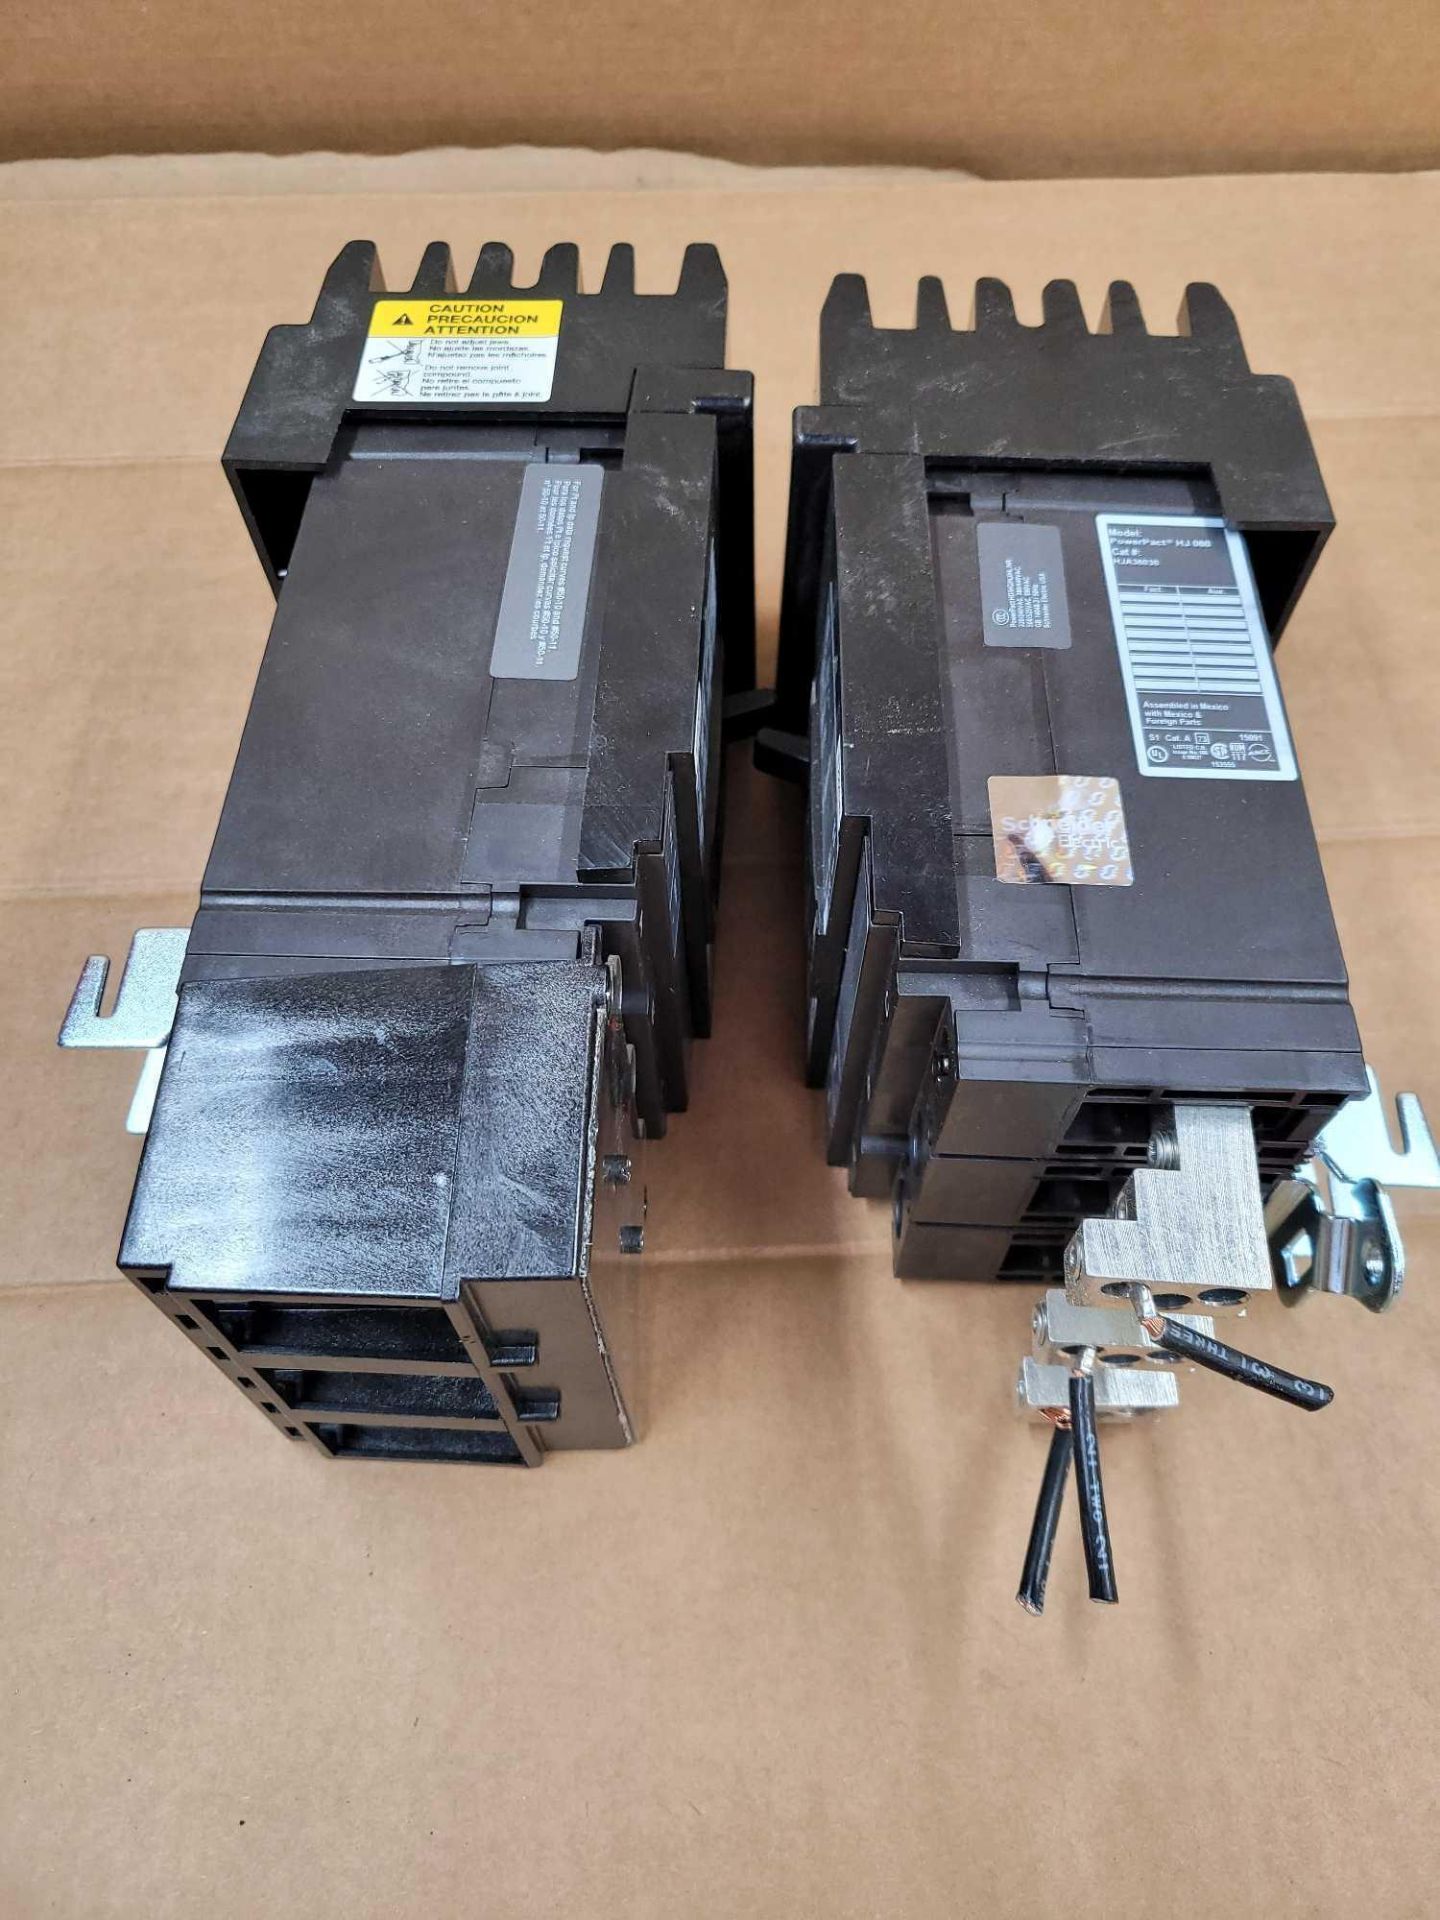 LOT OF 2 SQUARE D HJA36030 / 30 Amp Molded Case Circuit Breaker  /  Lot Weight: 9.6 lbs - Image 6 of 6